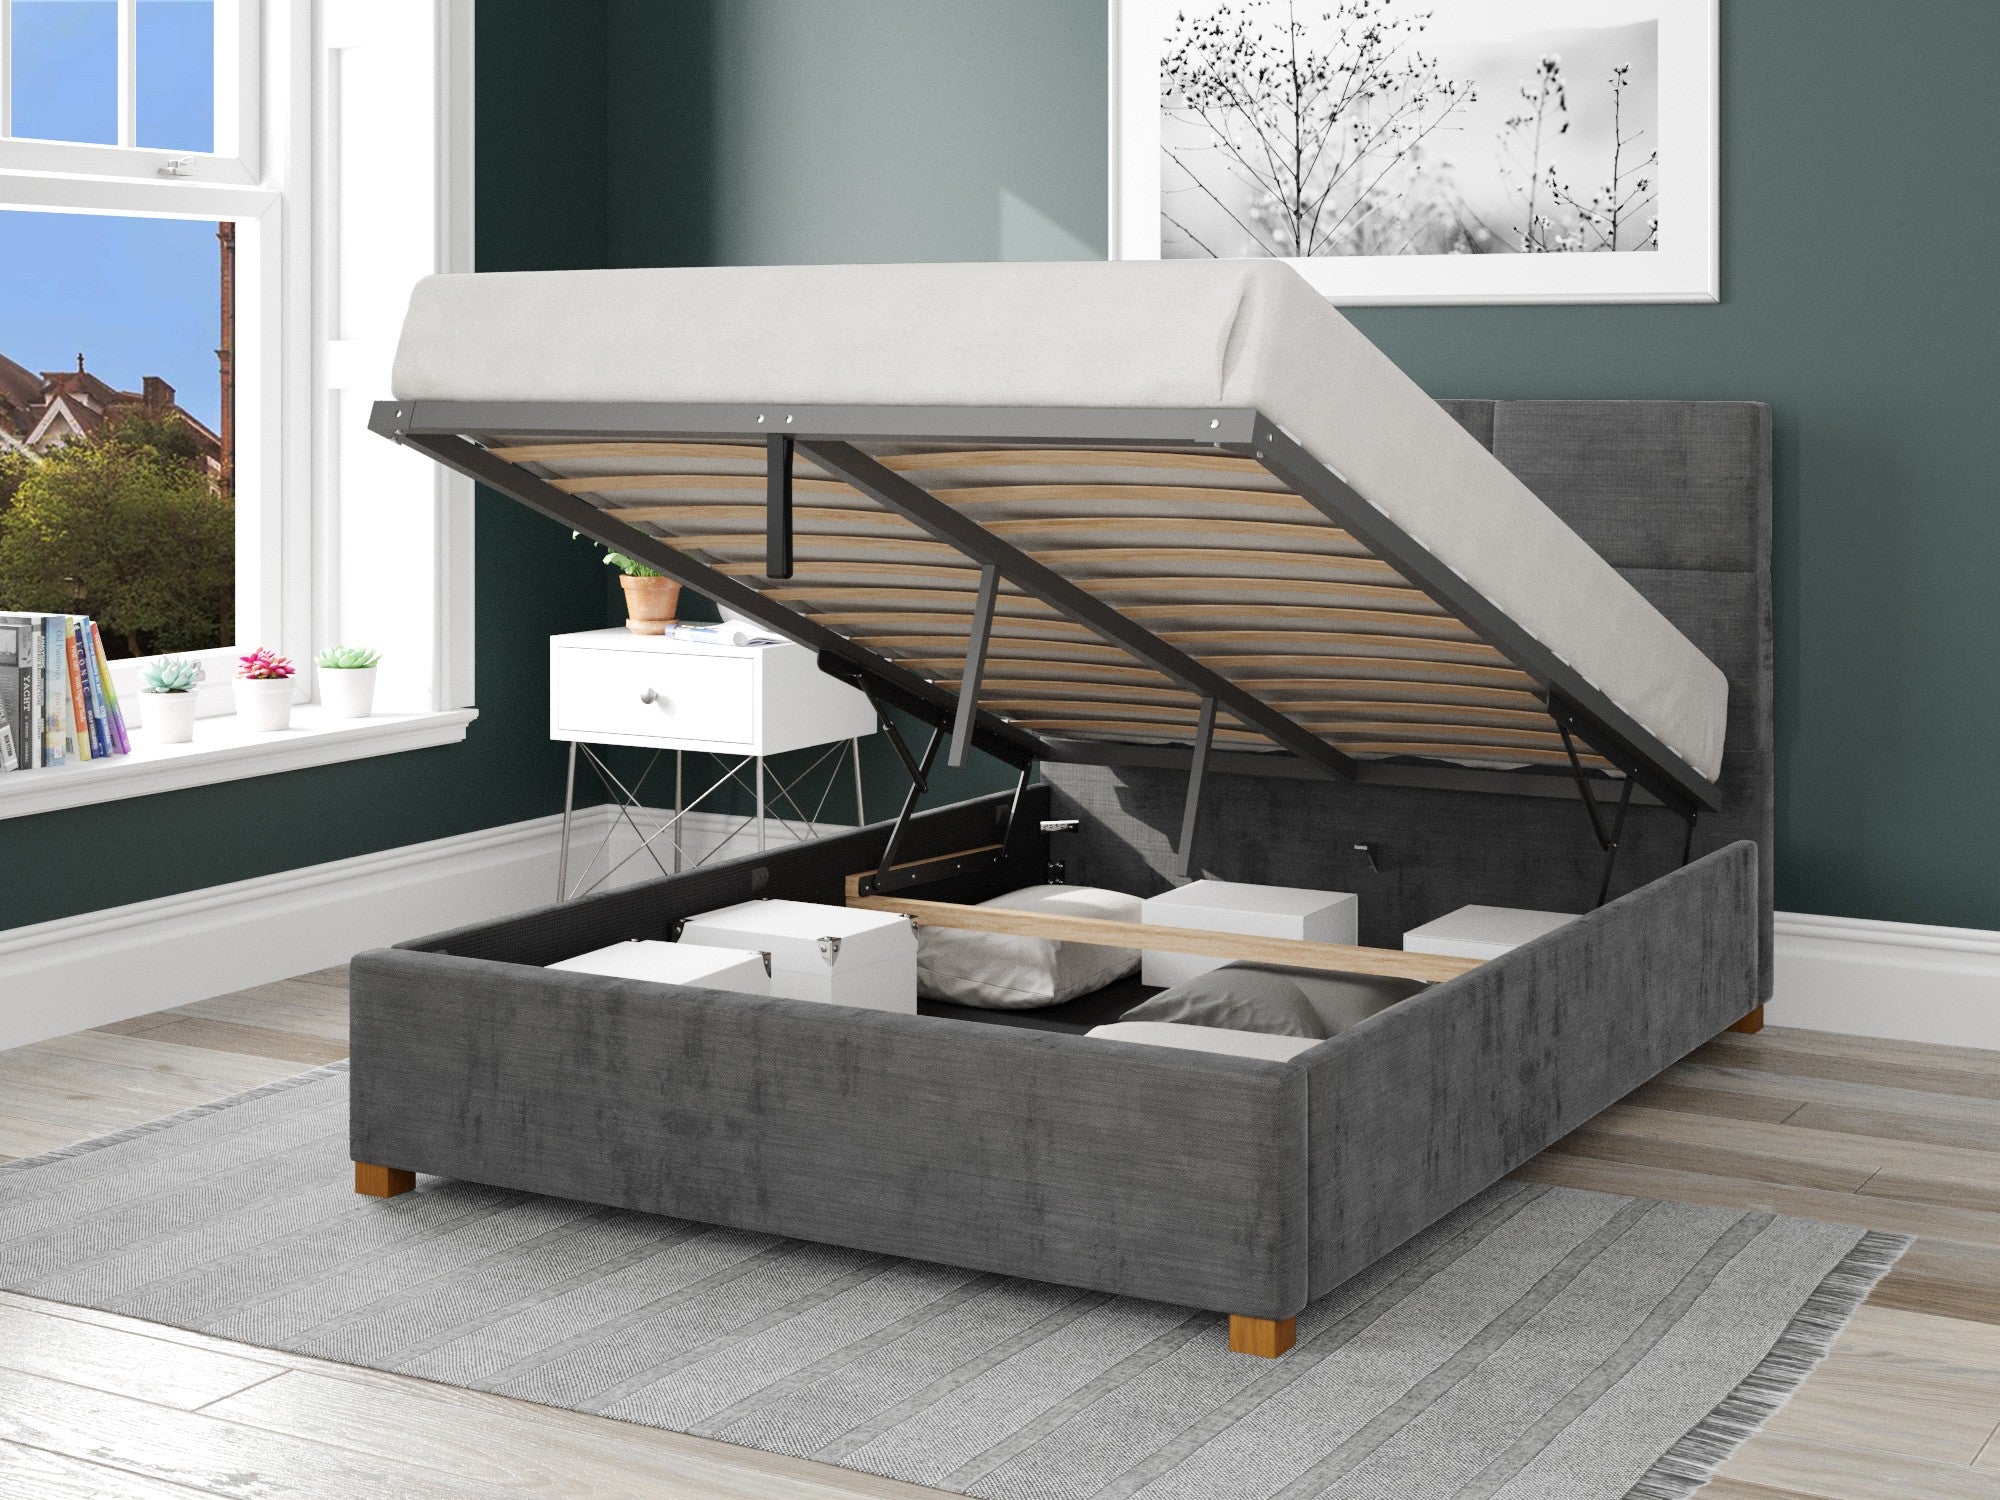 Caine Fabric Ottoman Bed - Firenza Velour - Charcoal